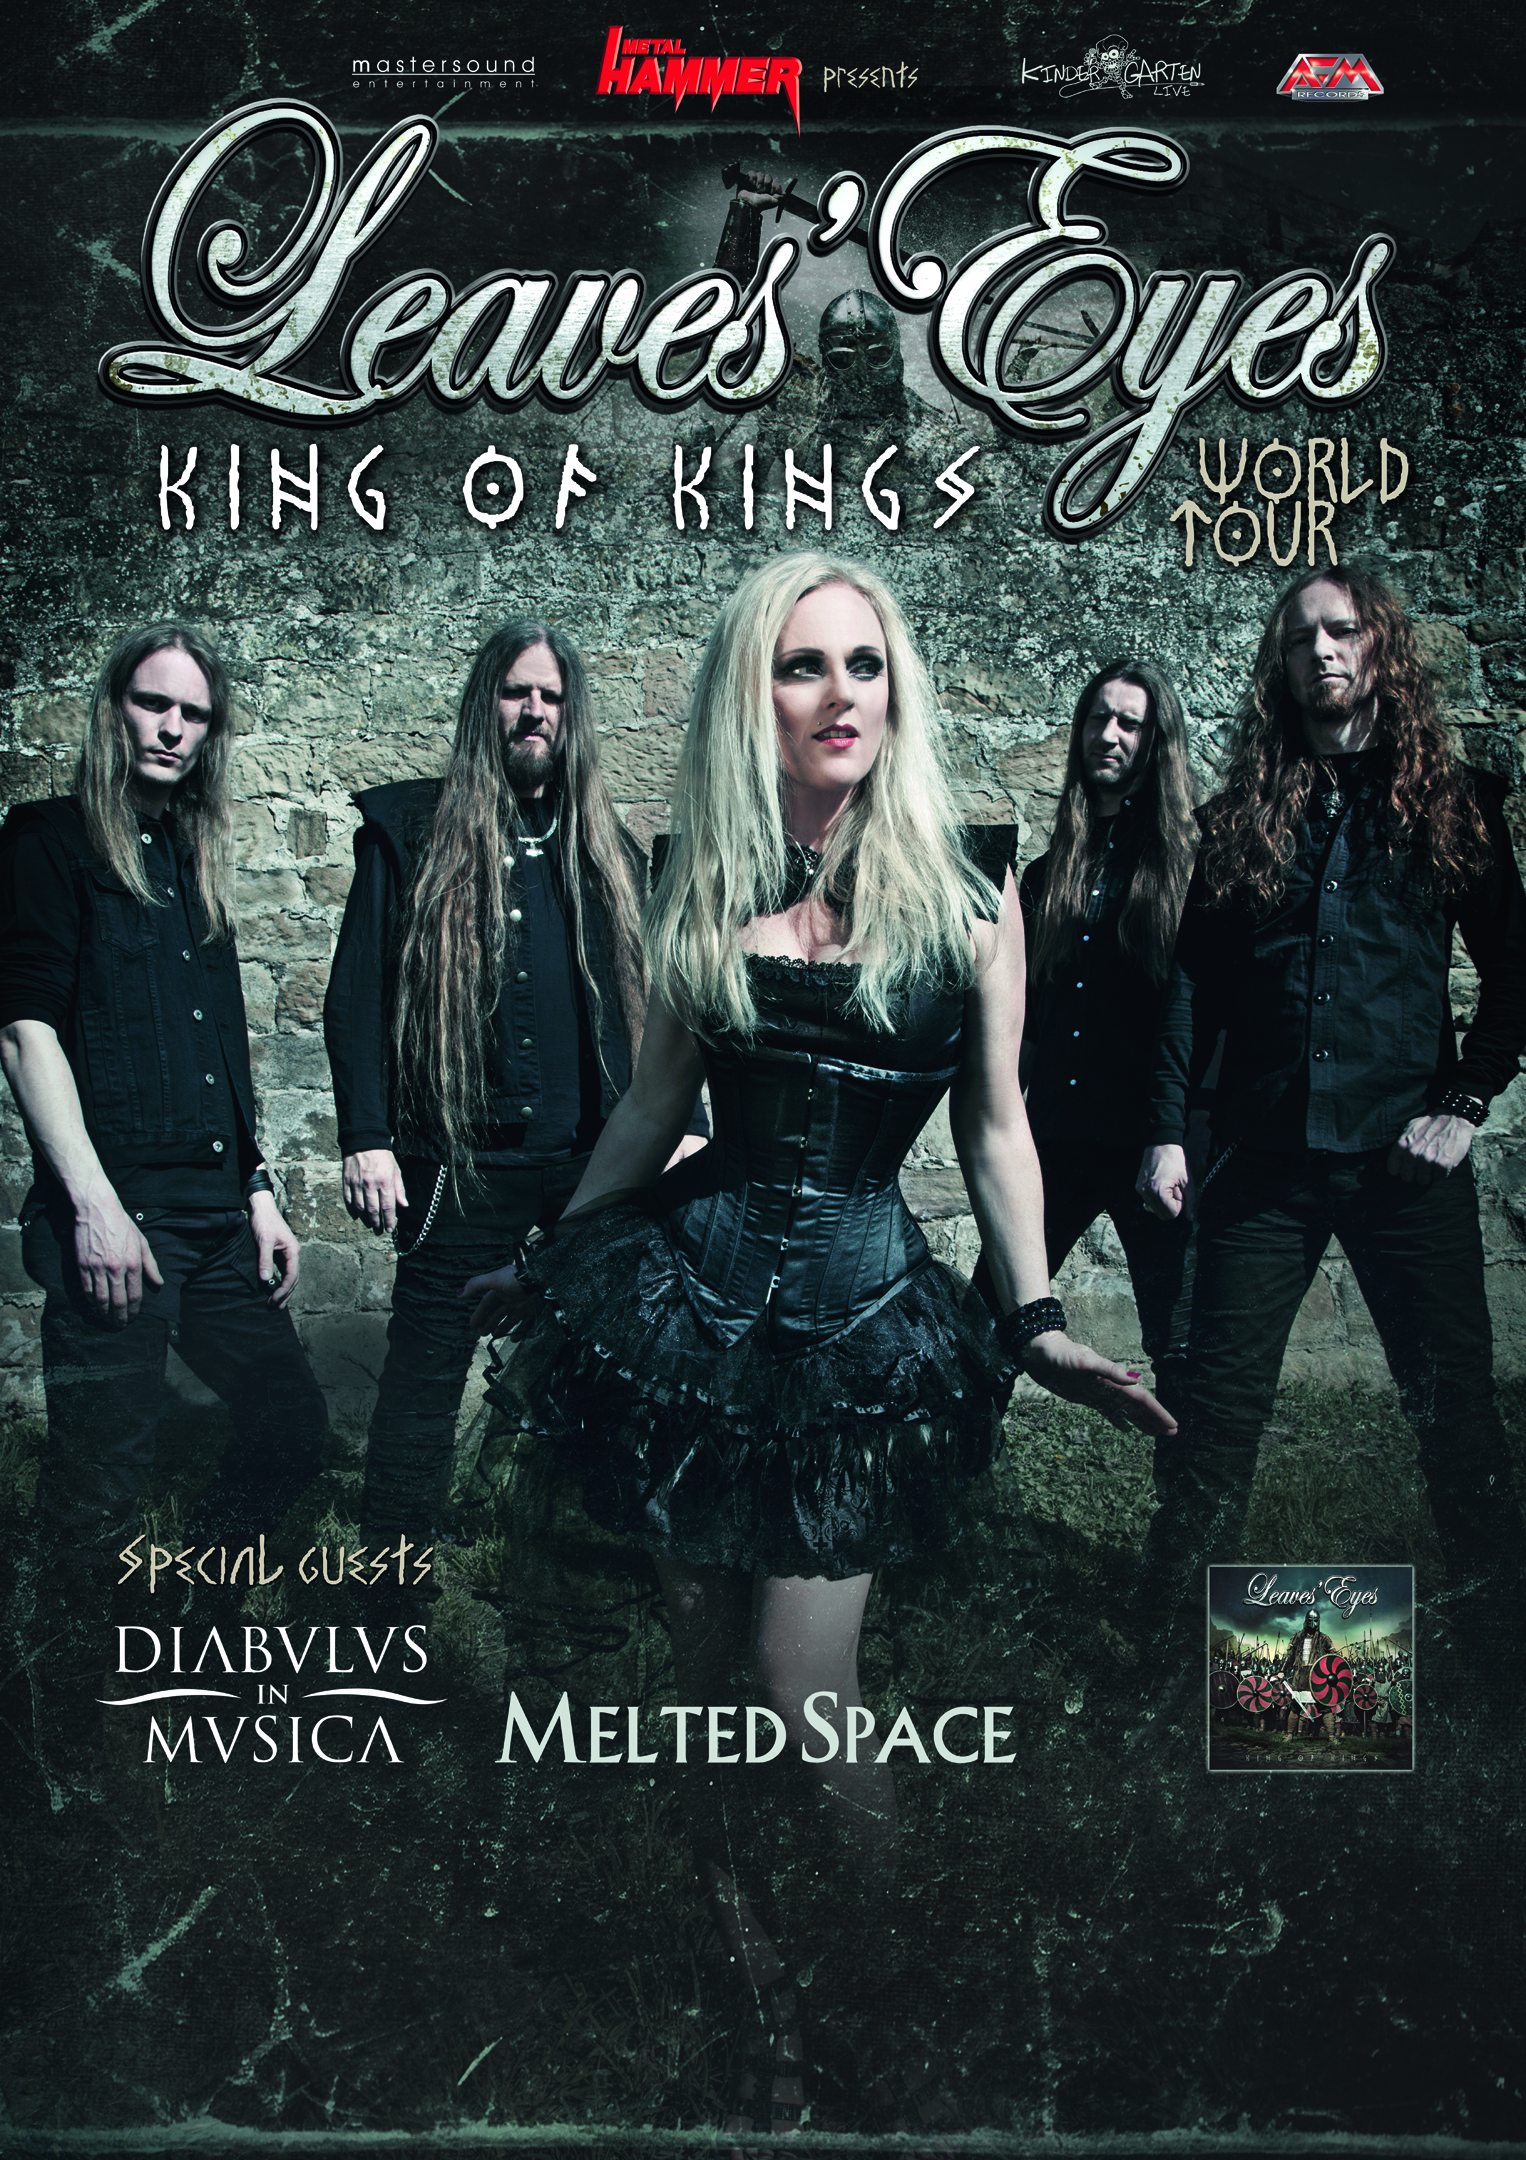 melted space-leaves eyes tour